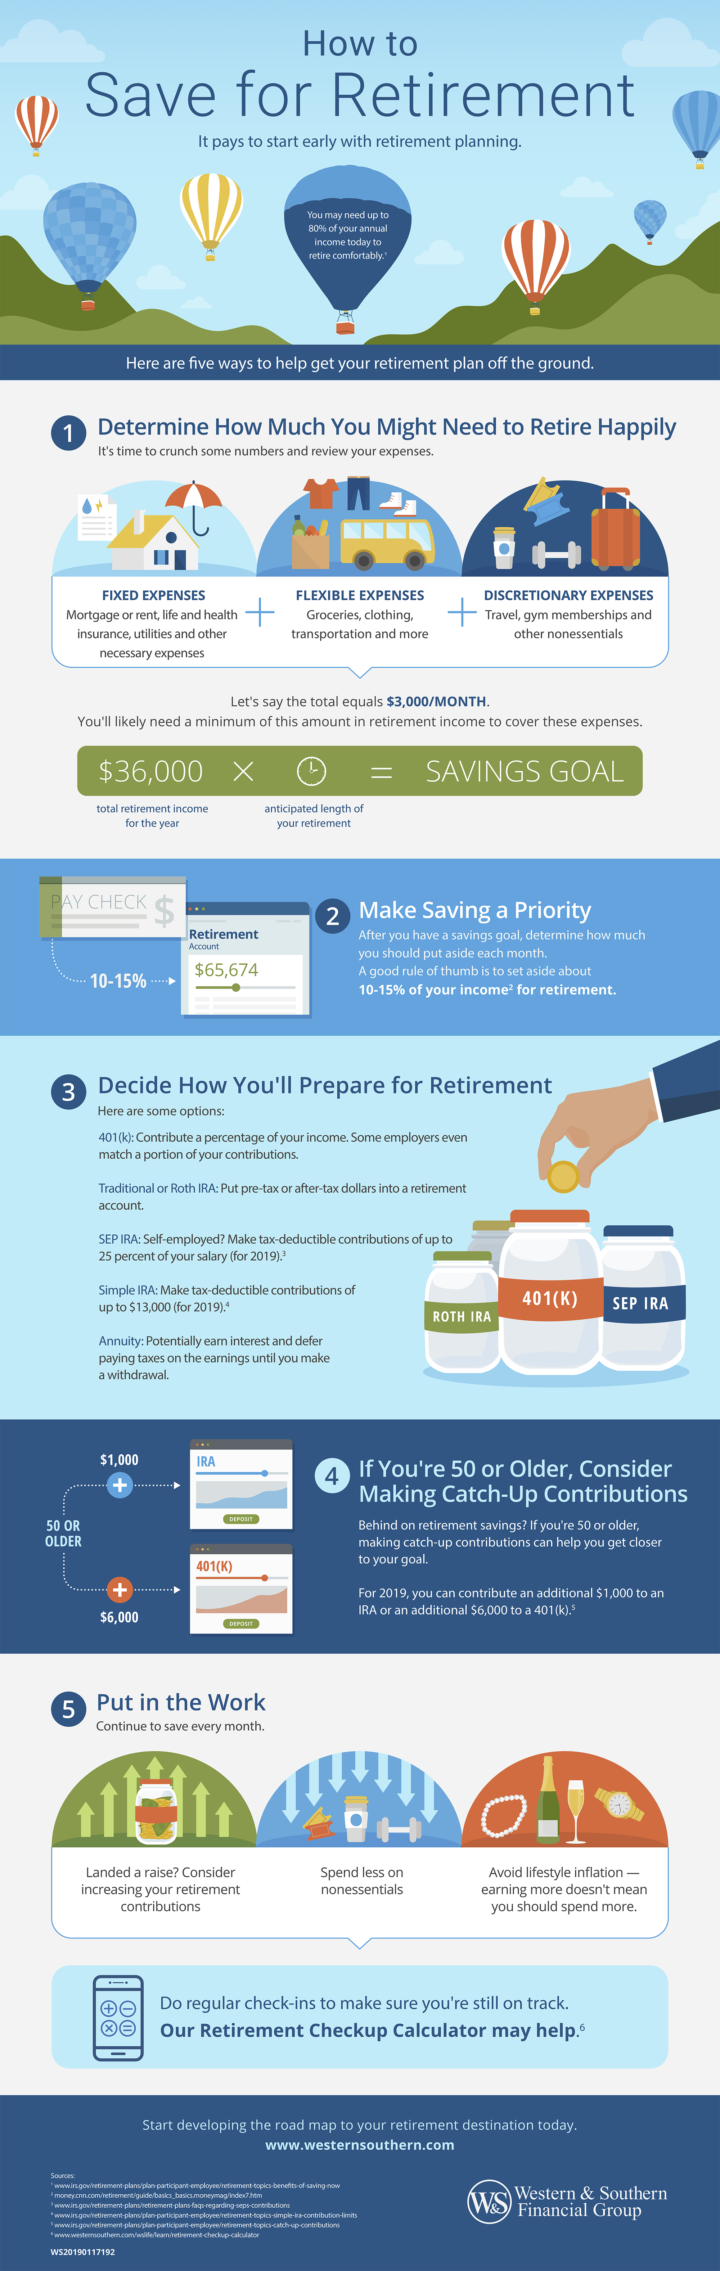 Infographic: How to Save for Retirement